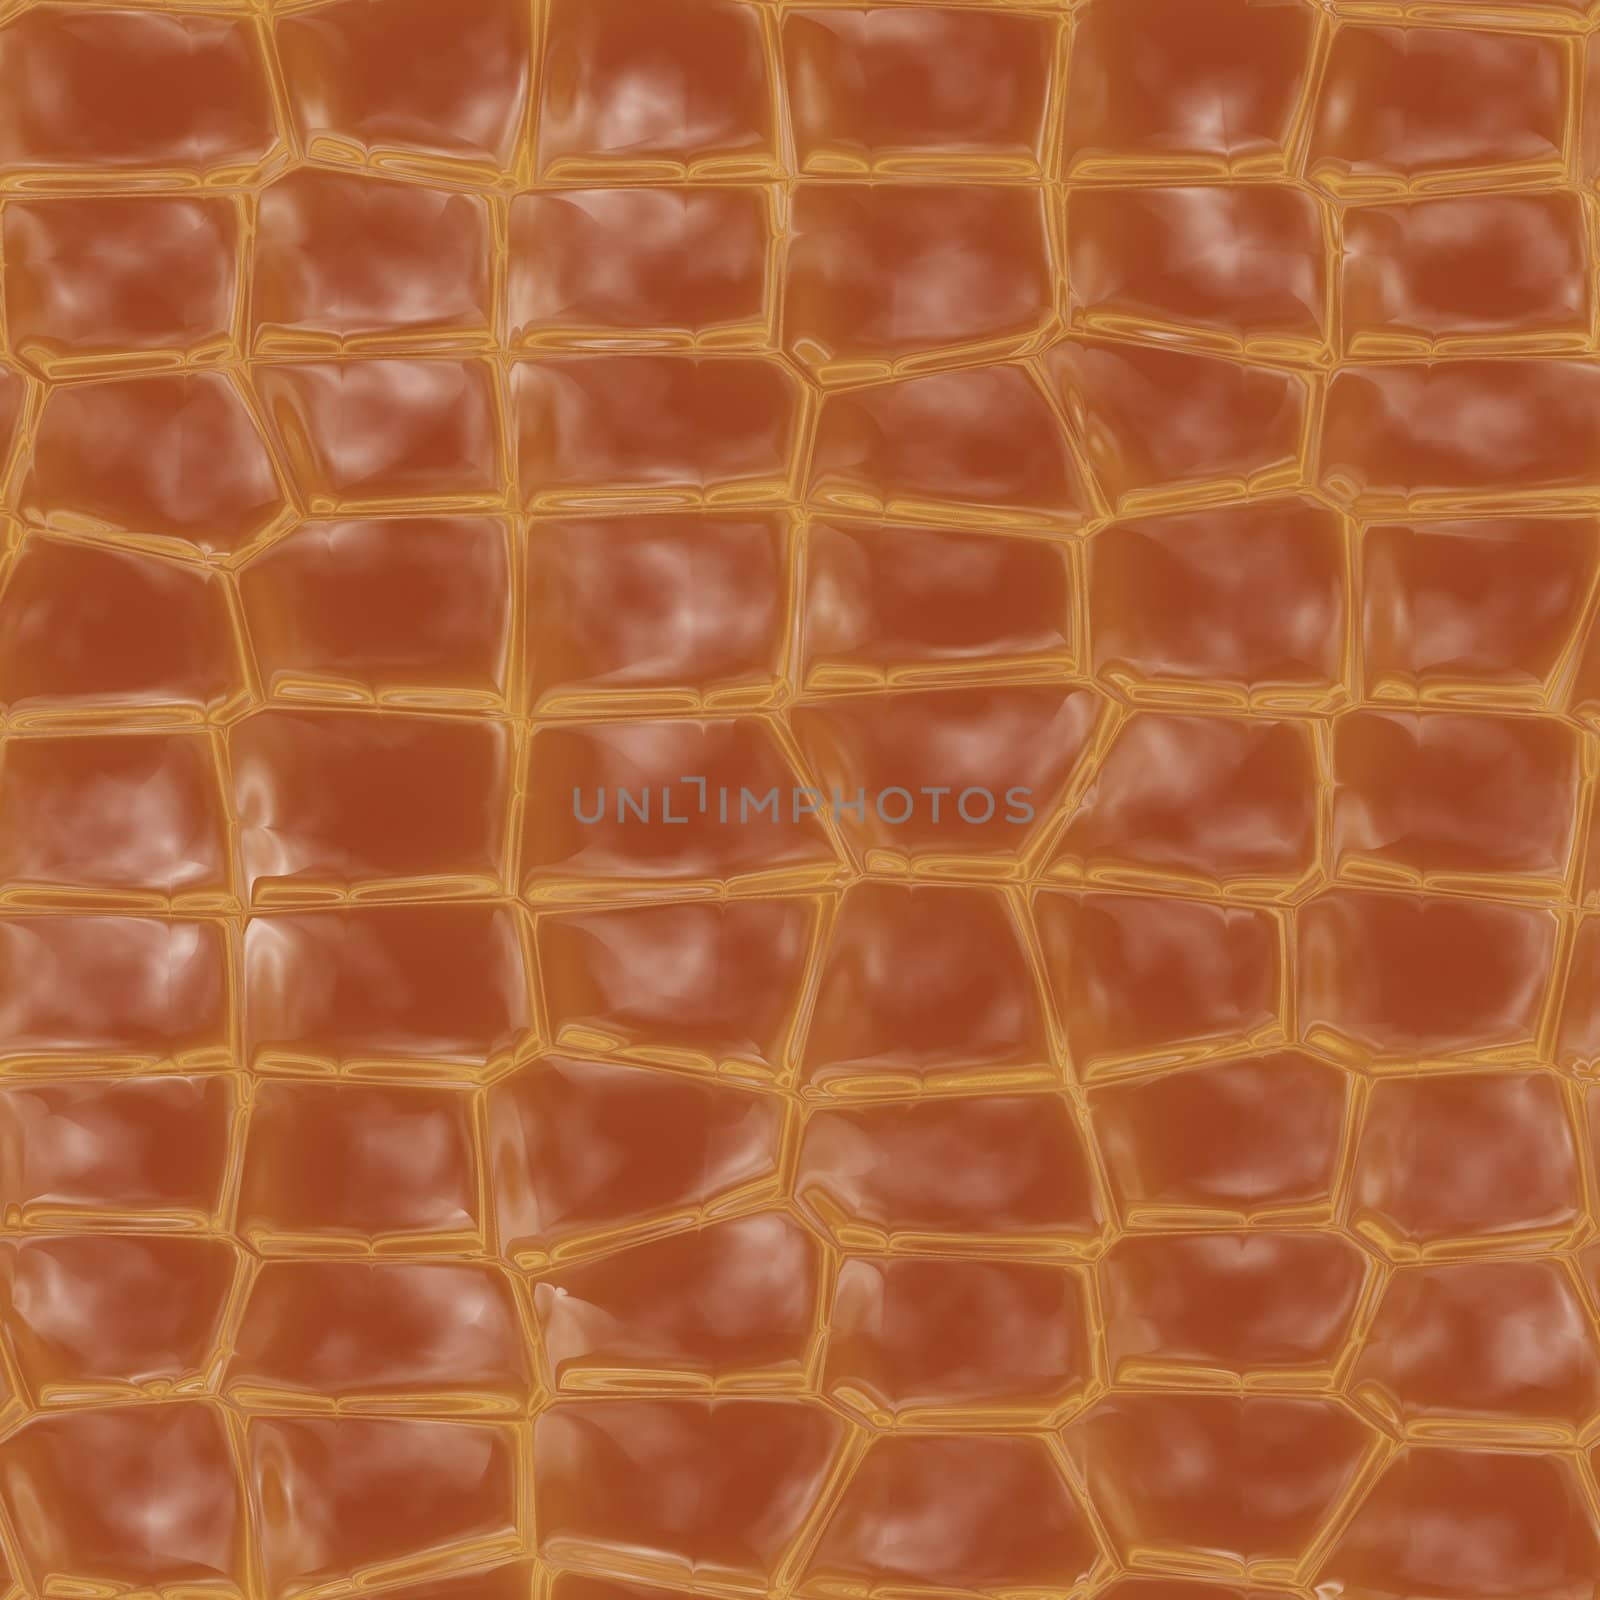 The texture alligator skin,  suits for duplication of the background, illustration